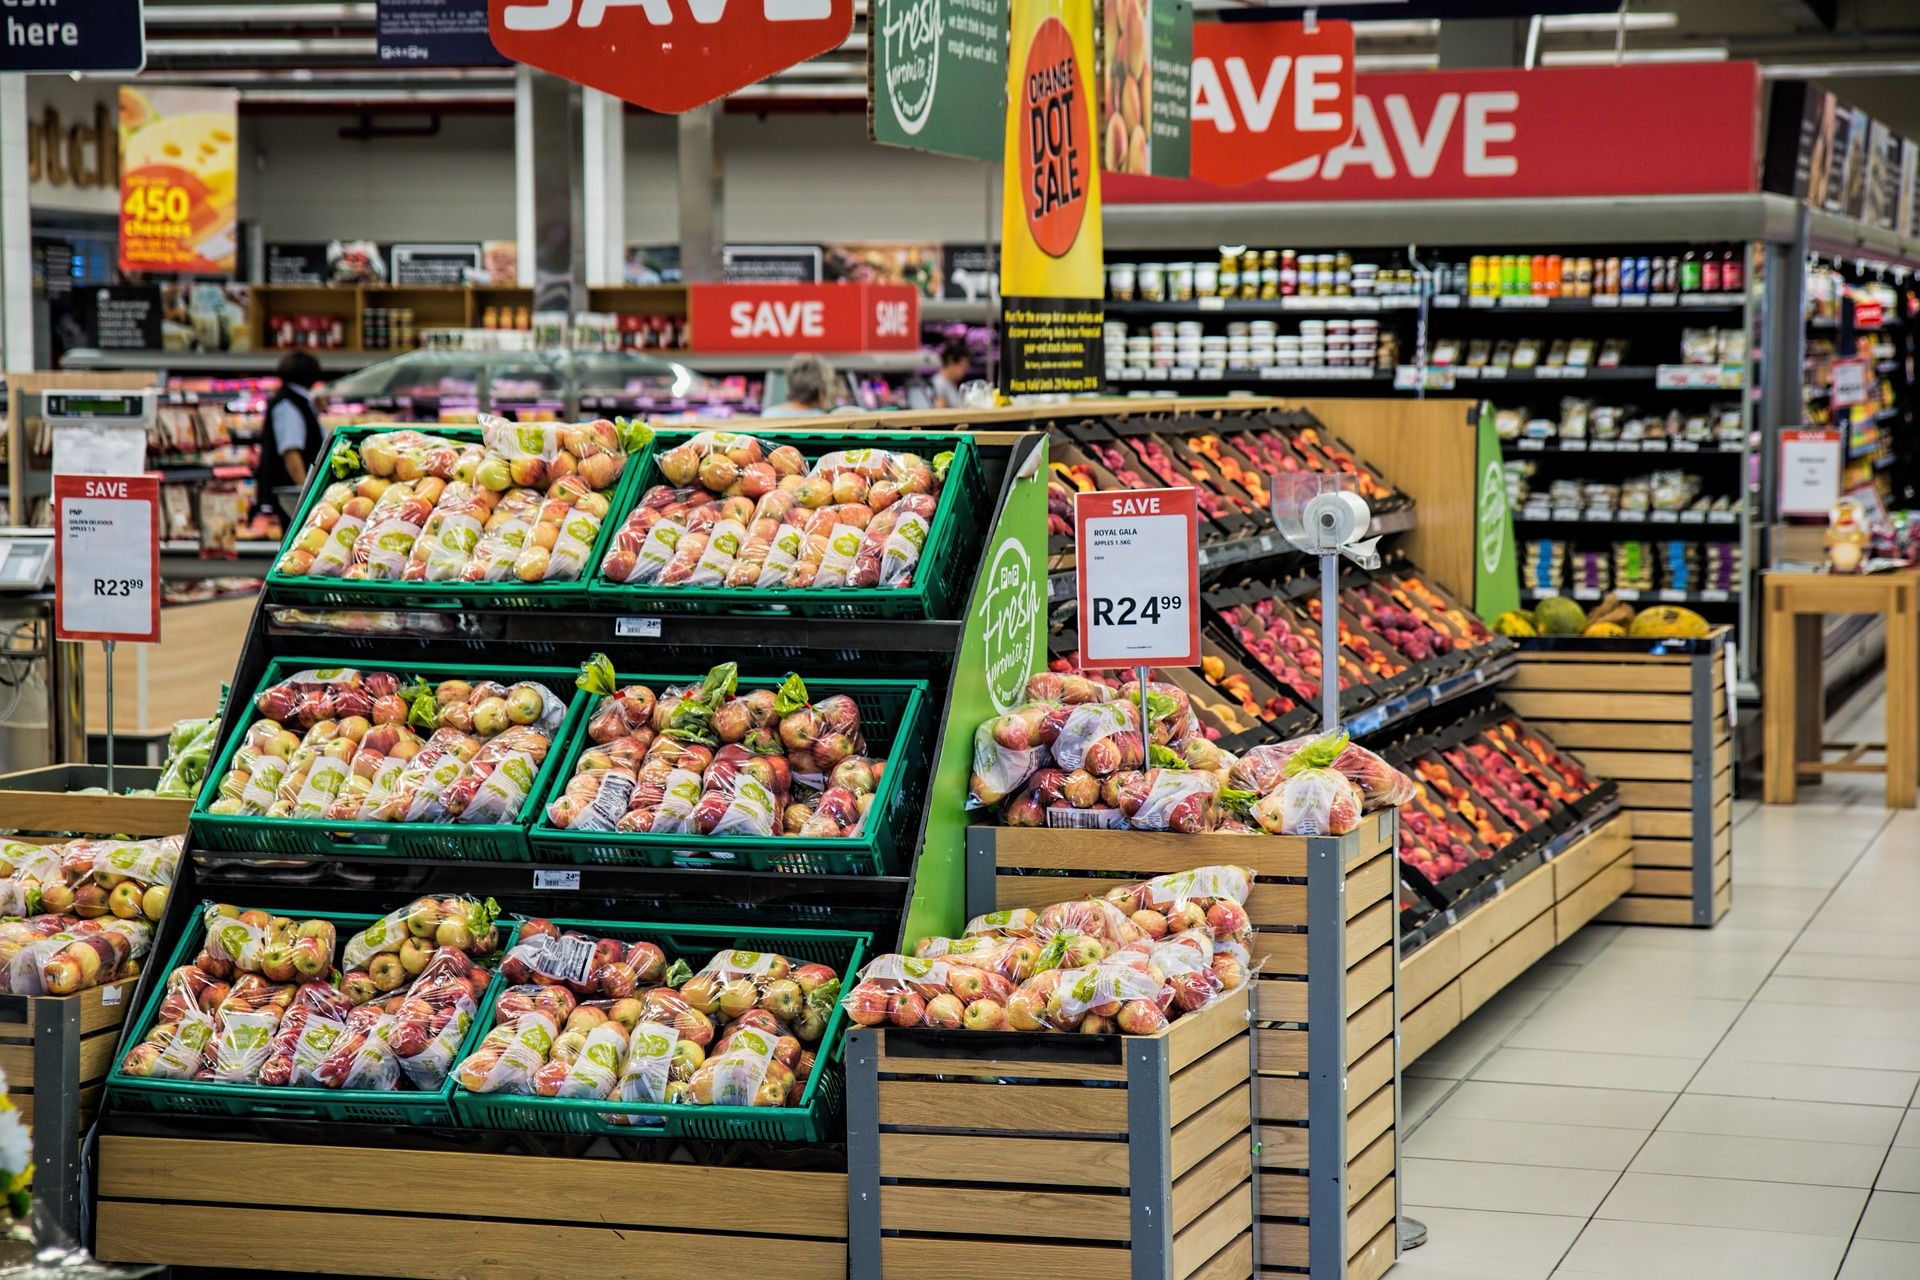 which south african supermarket is the cheapest this week?